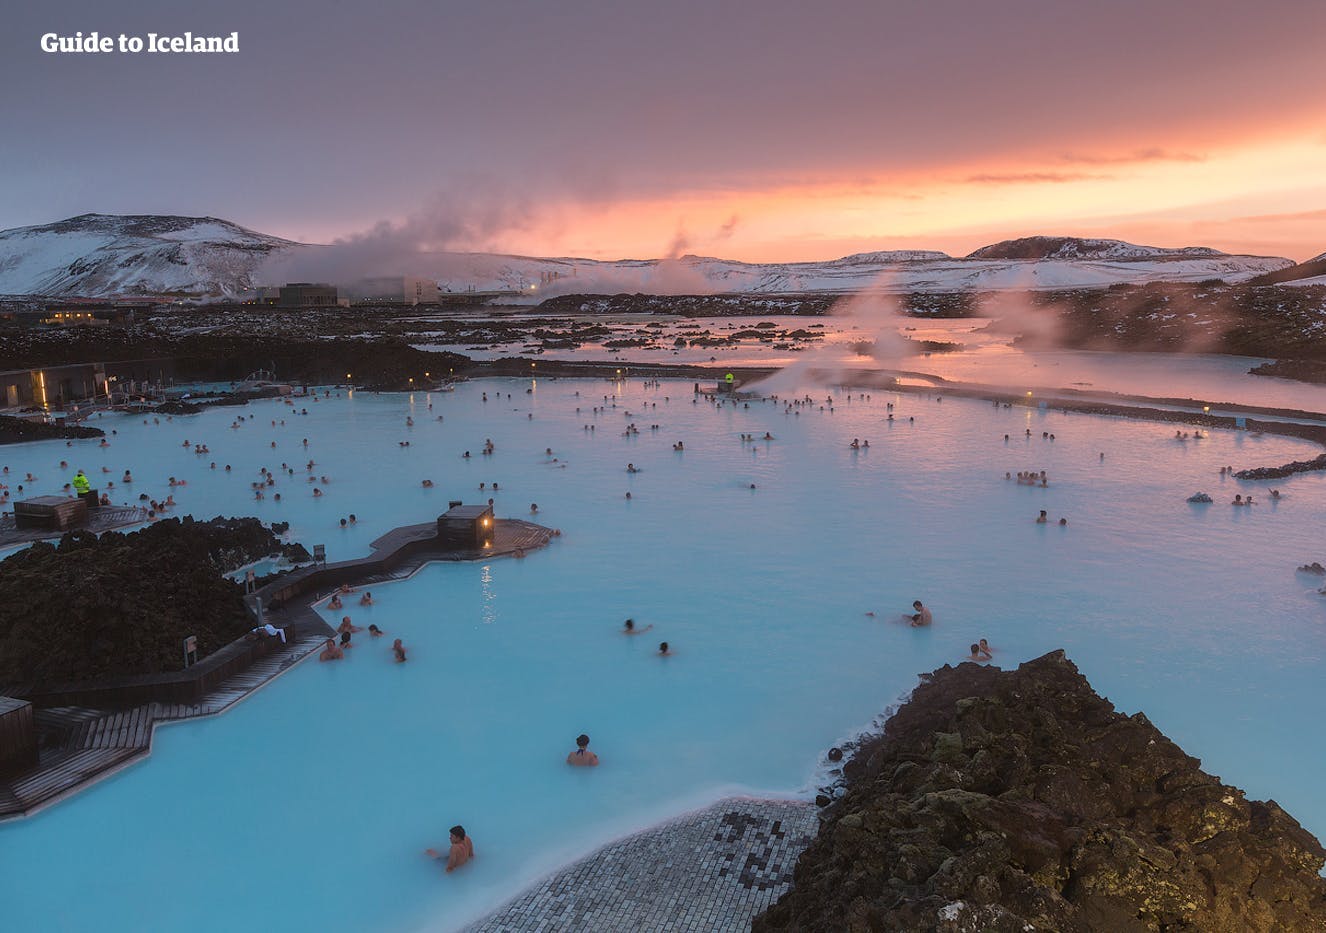 The Blue Lagoon is one of Iceland's most famous visitor attractions.